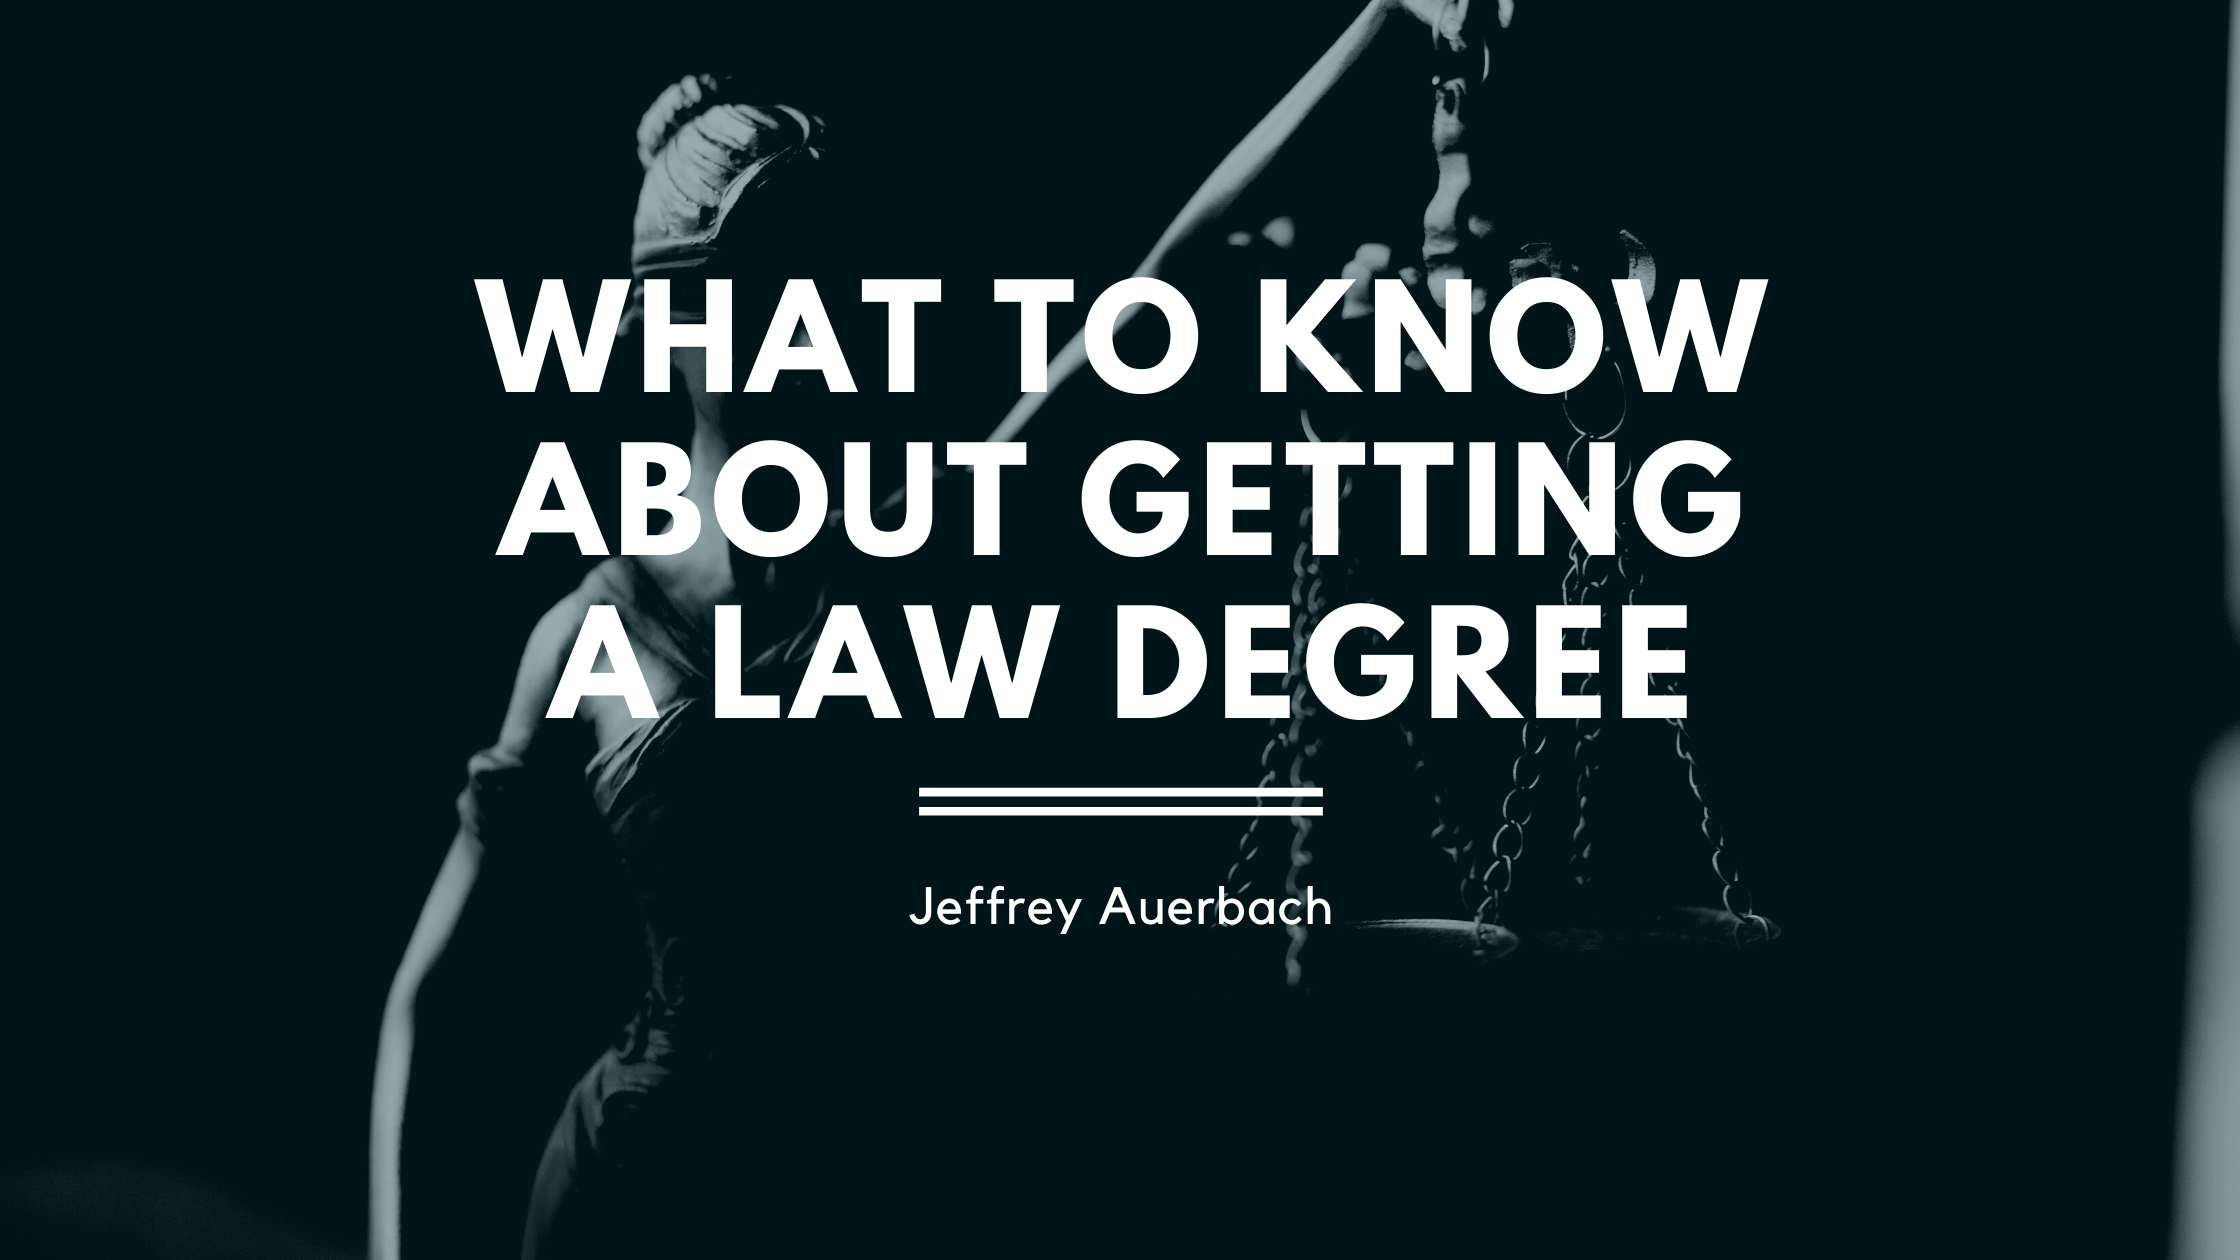 what-to-know-about-getting-a-law-degree-jeffrey-auerbach